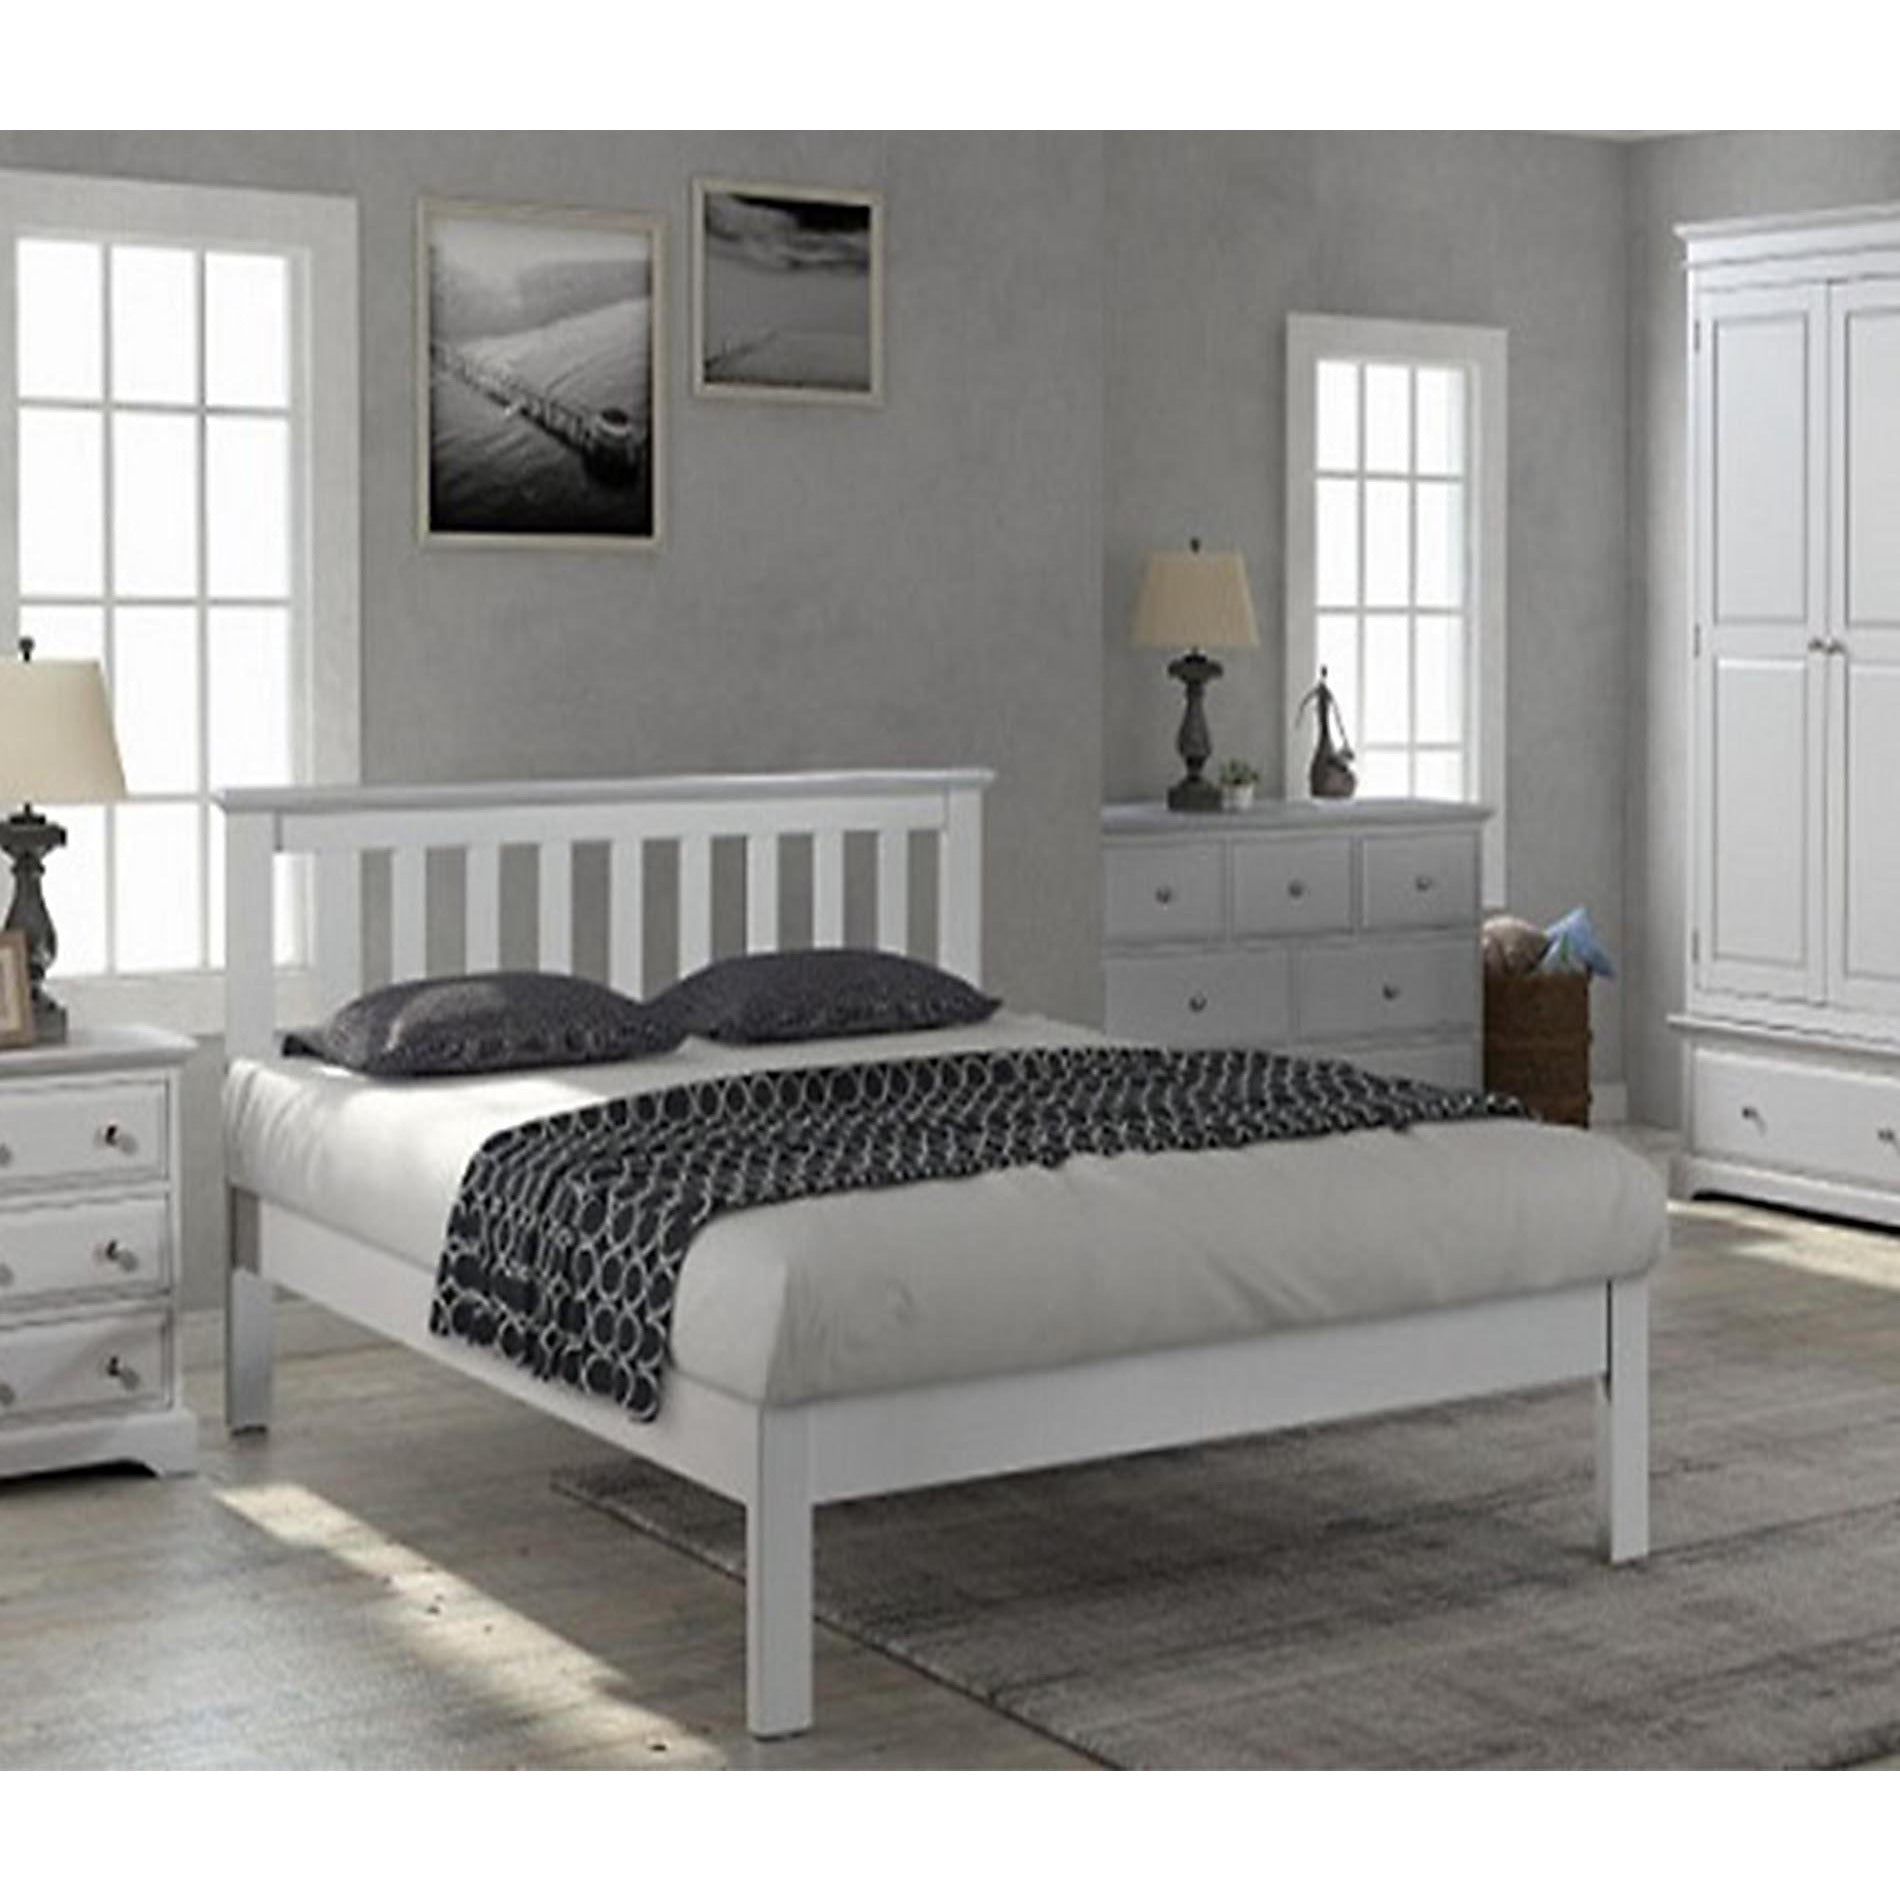 Provence 4ft6 Double Bed Frame from Upstairs Downstairs Furniture in Lisburn, Monaghan and Enniskillen